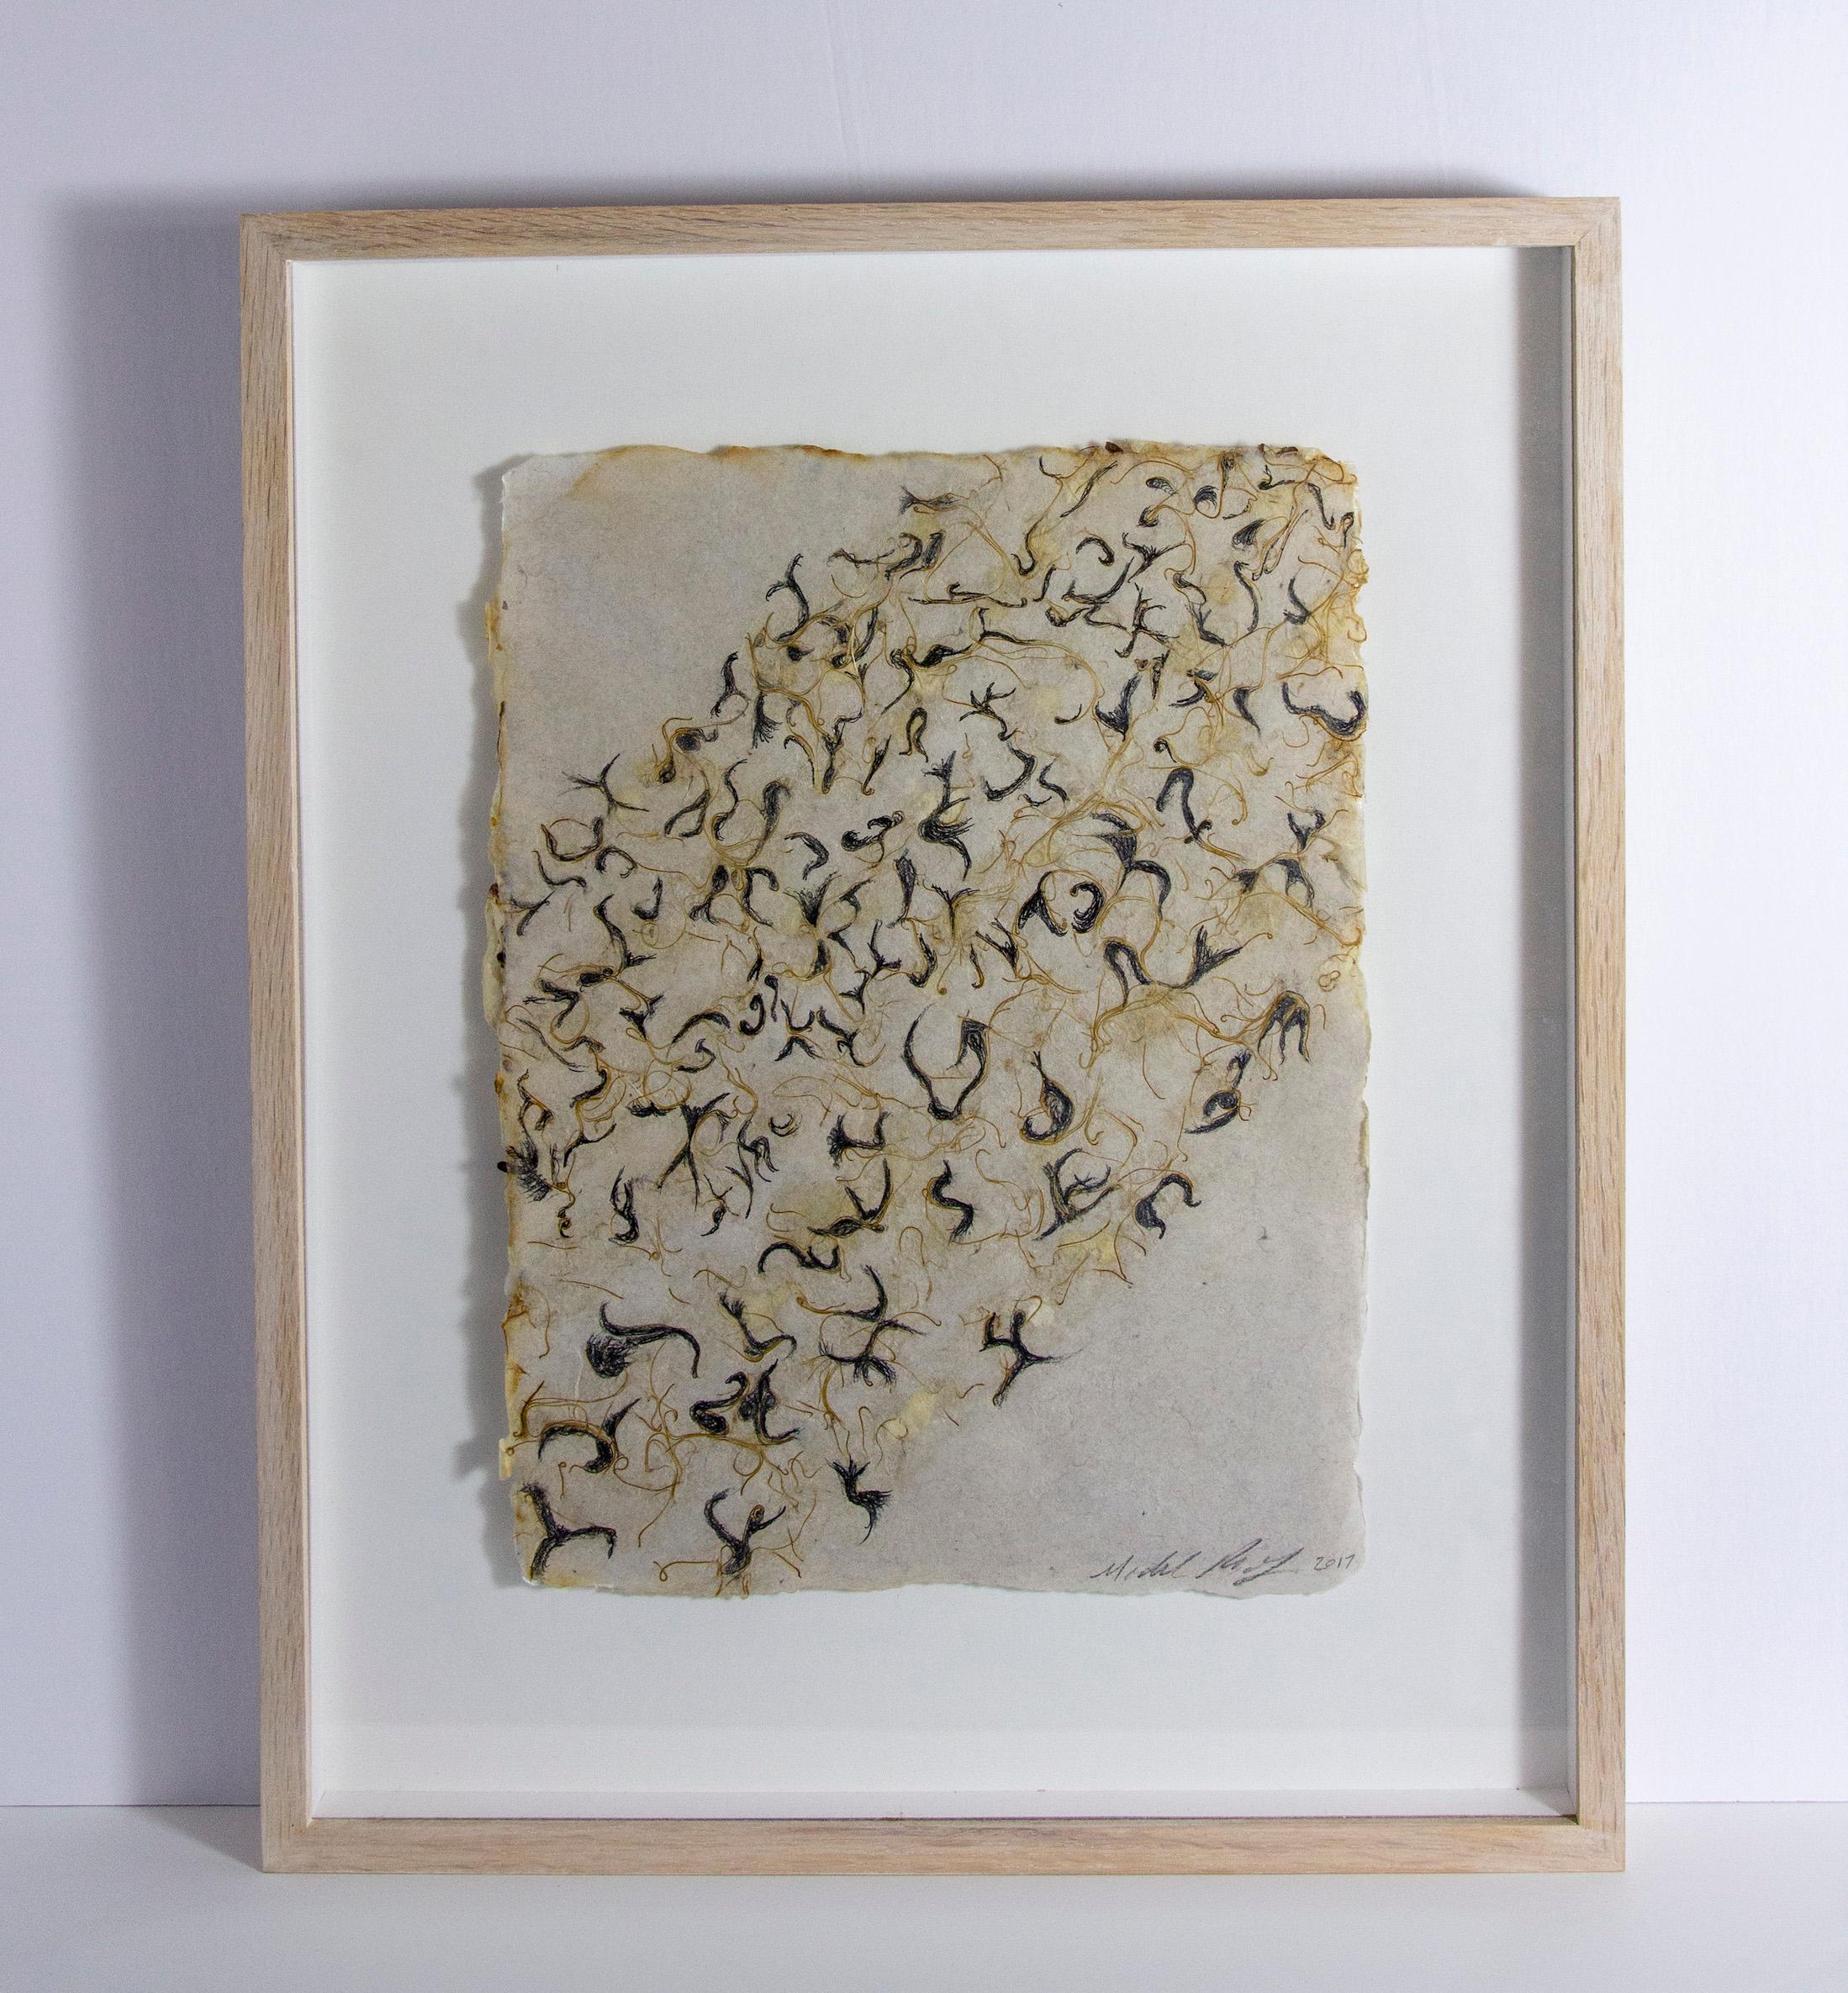 Michele Brody, Drawing Roots: Free Falling, Handmade Paper with Flax Roots